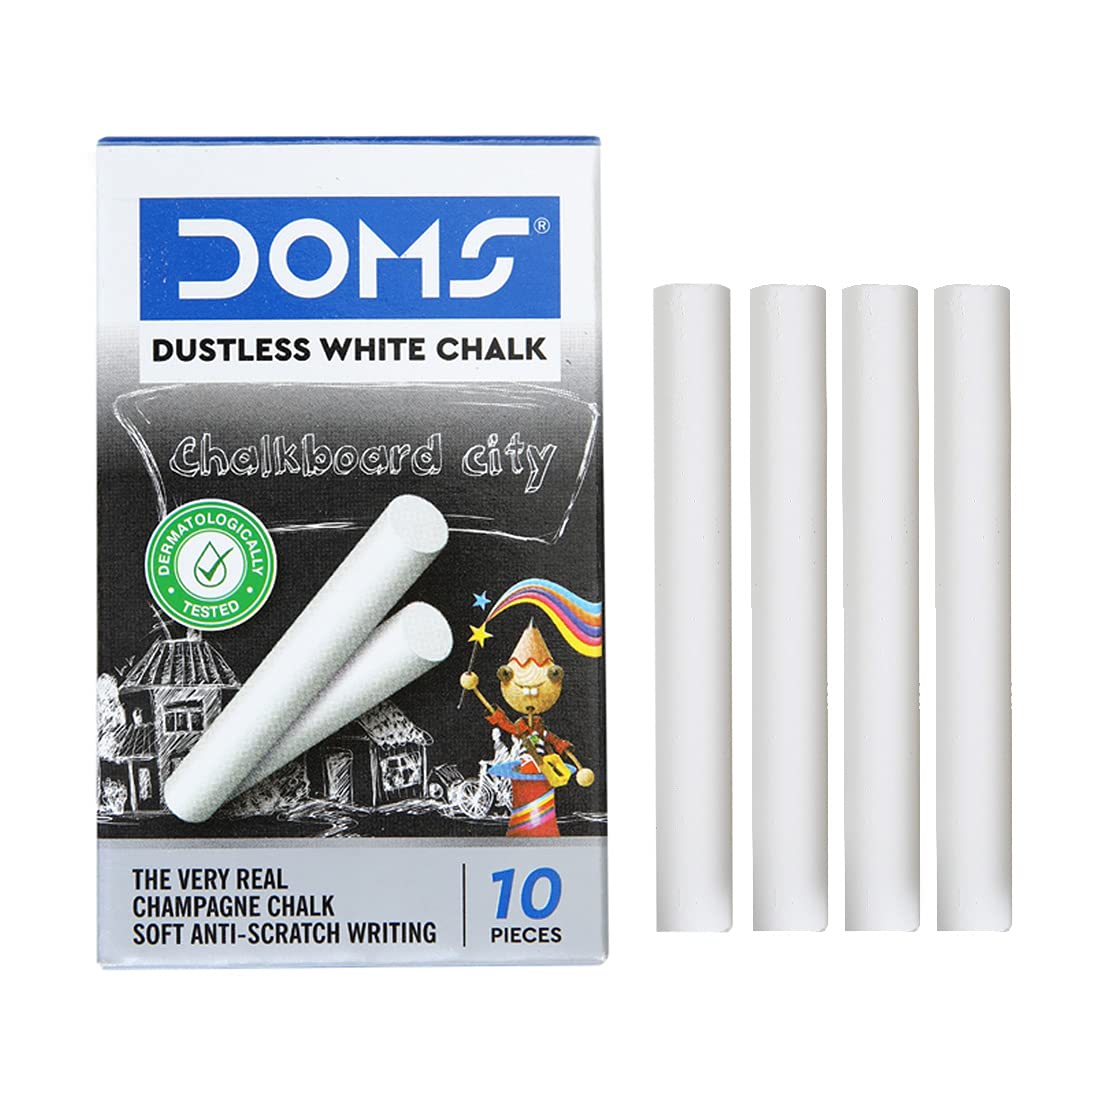 Doms Non-Toxic White Chalk | Extra Bright, Smooth & Long Lasting | Soft & Anti-Scratch Writing | Mess-free Dustless Chalk Sticks | Pack Of 10 box